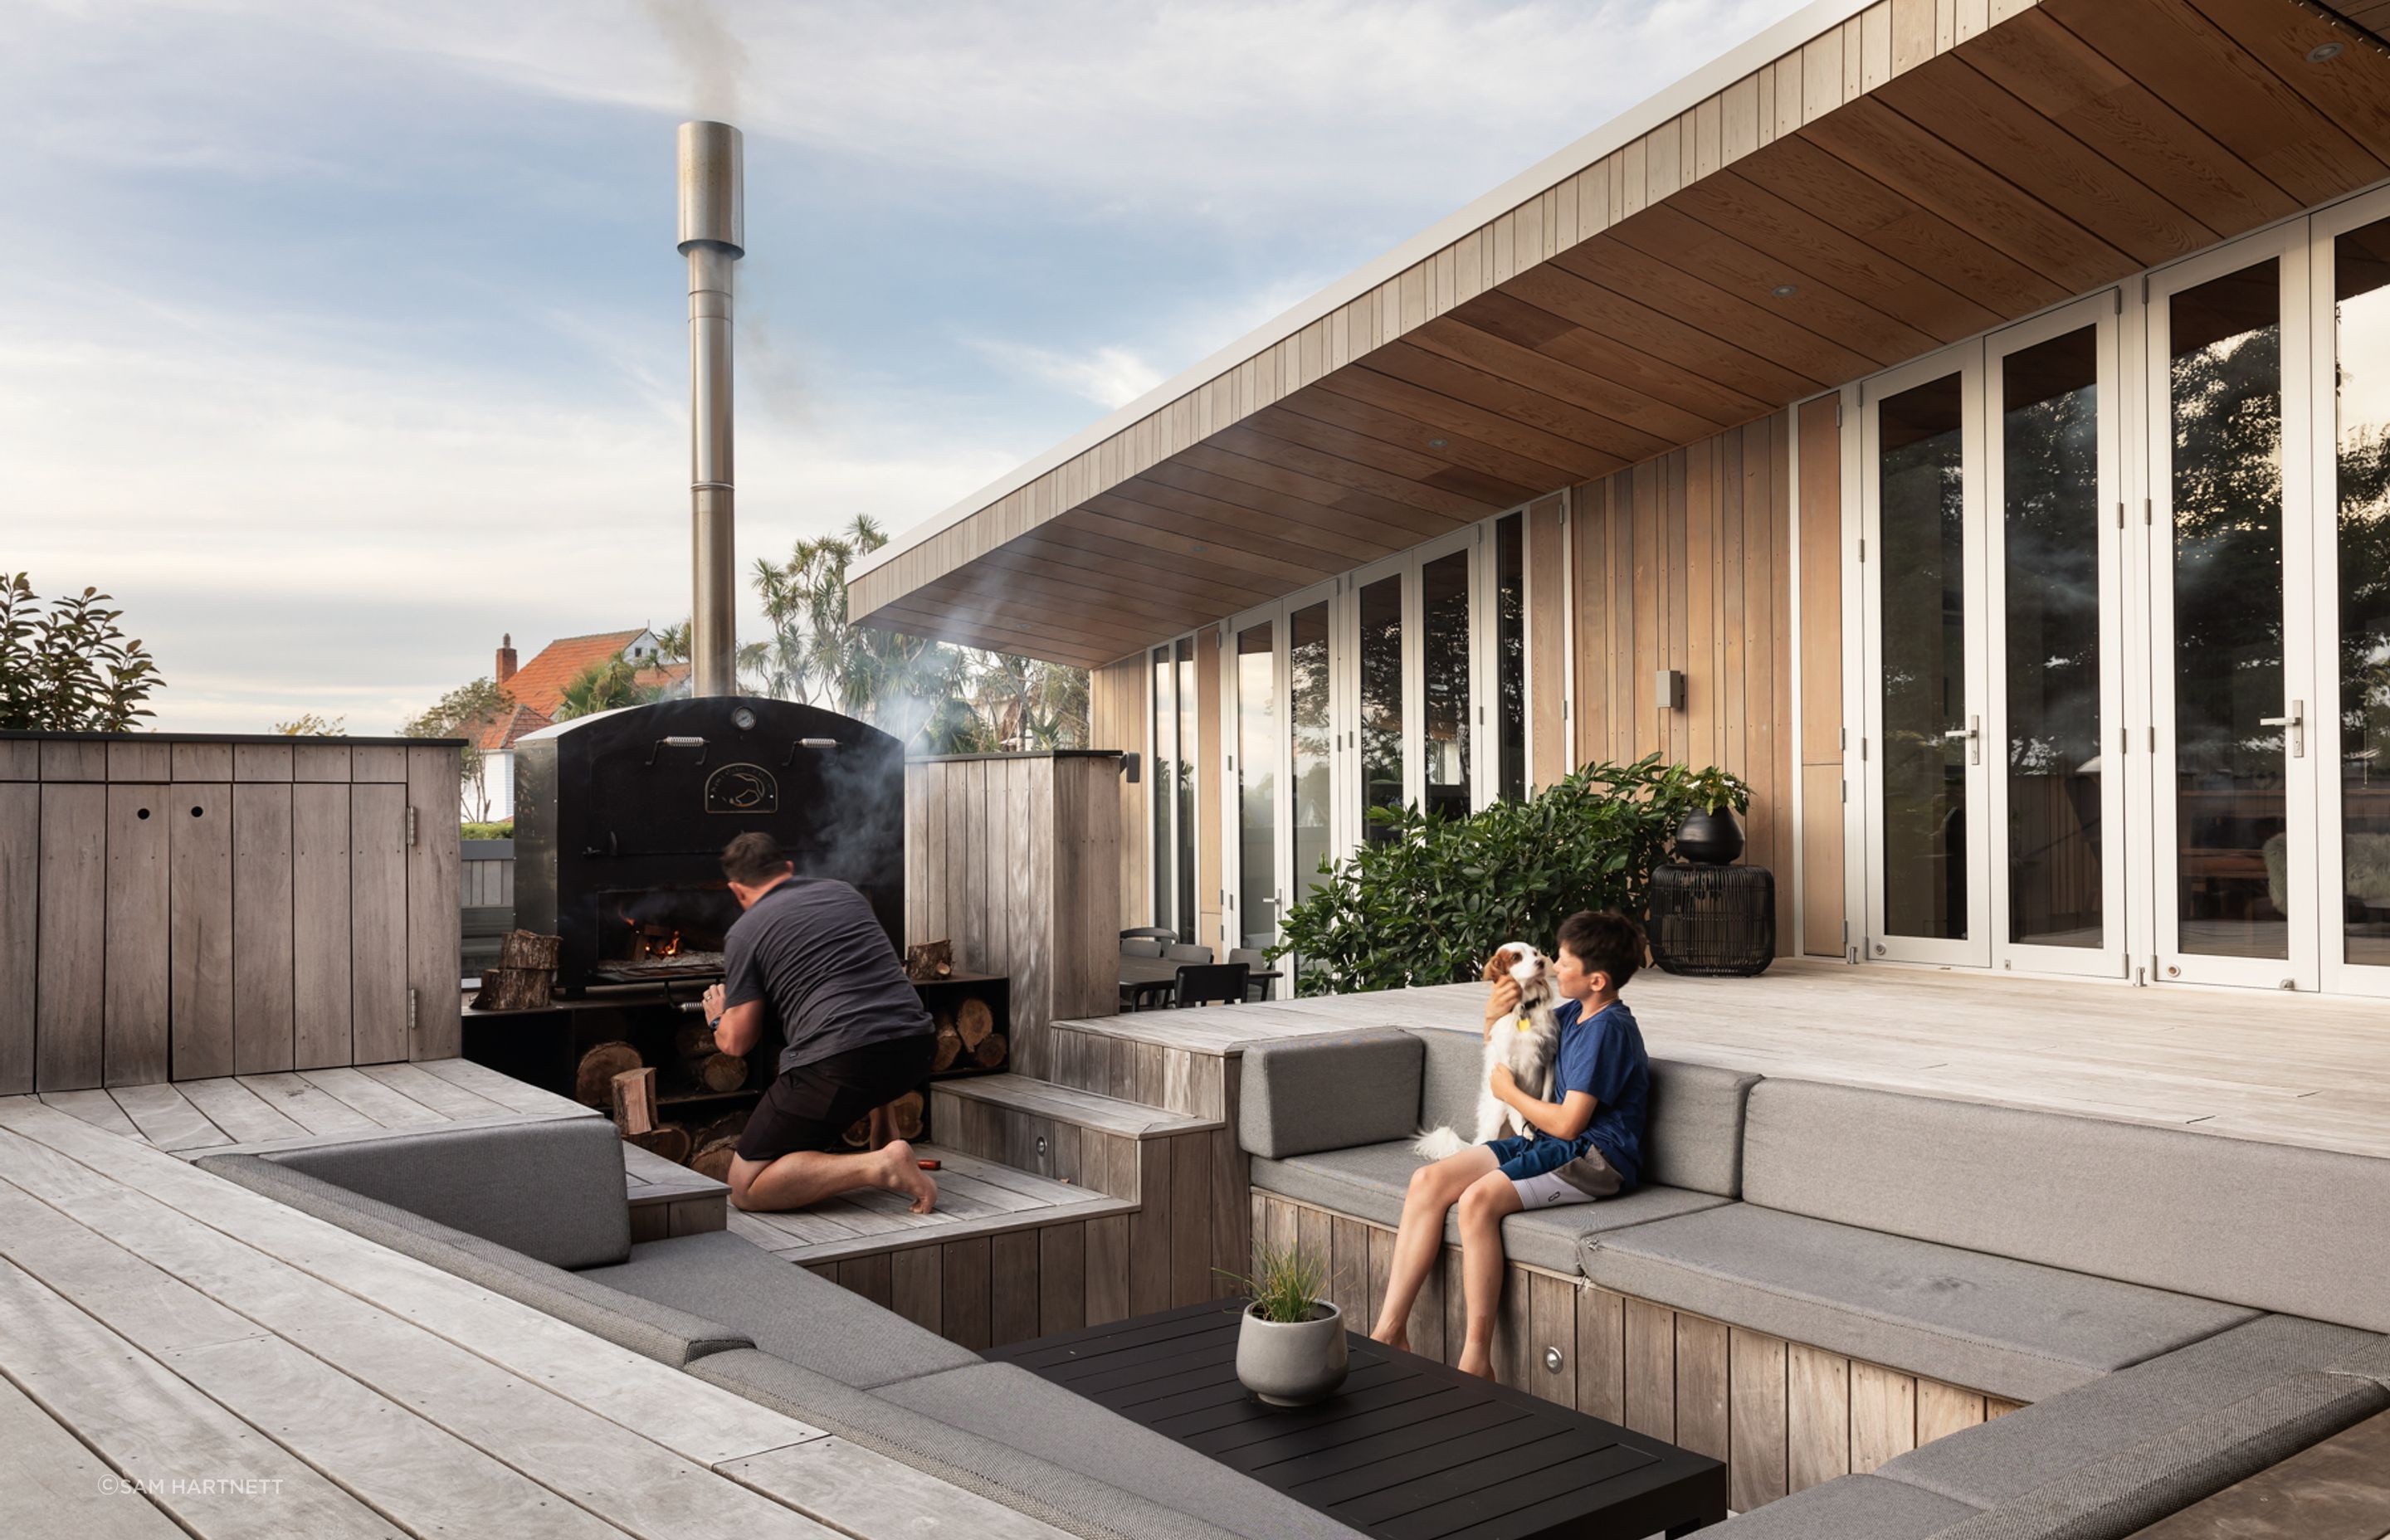 The sunken outdoor setting was designed to place people at eye level to the outdoor fire; creating a greater sense of intimacy than if they were sitting at a table.